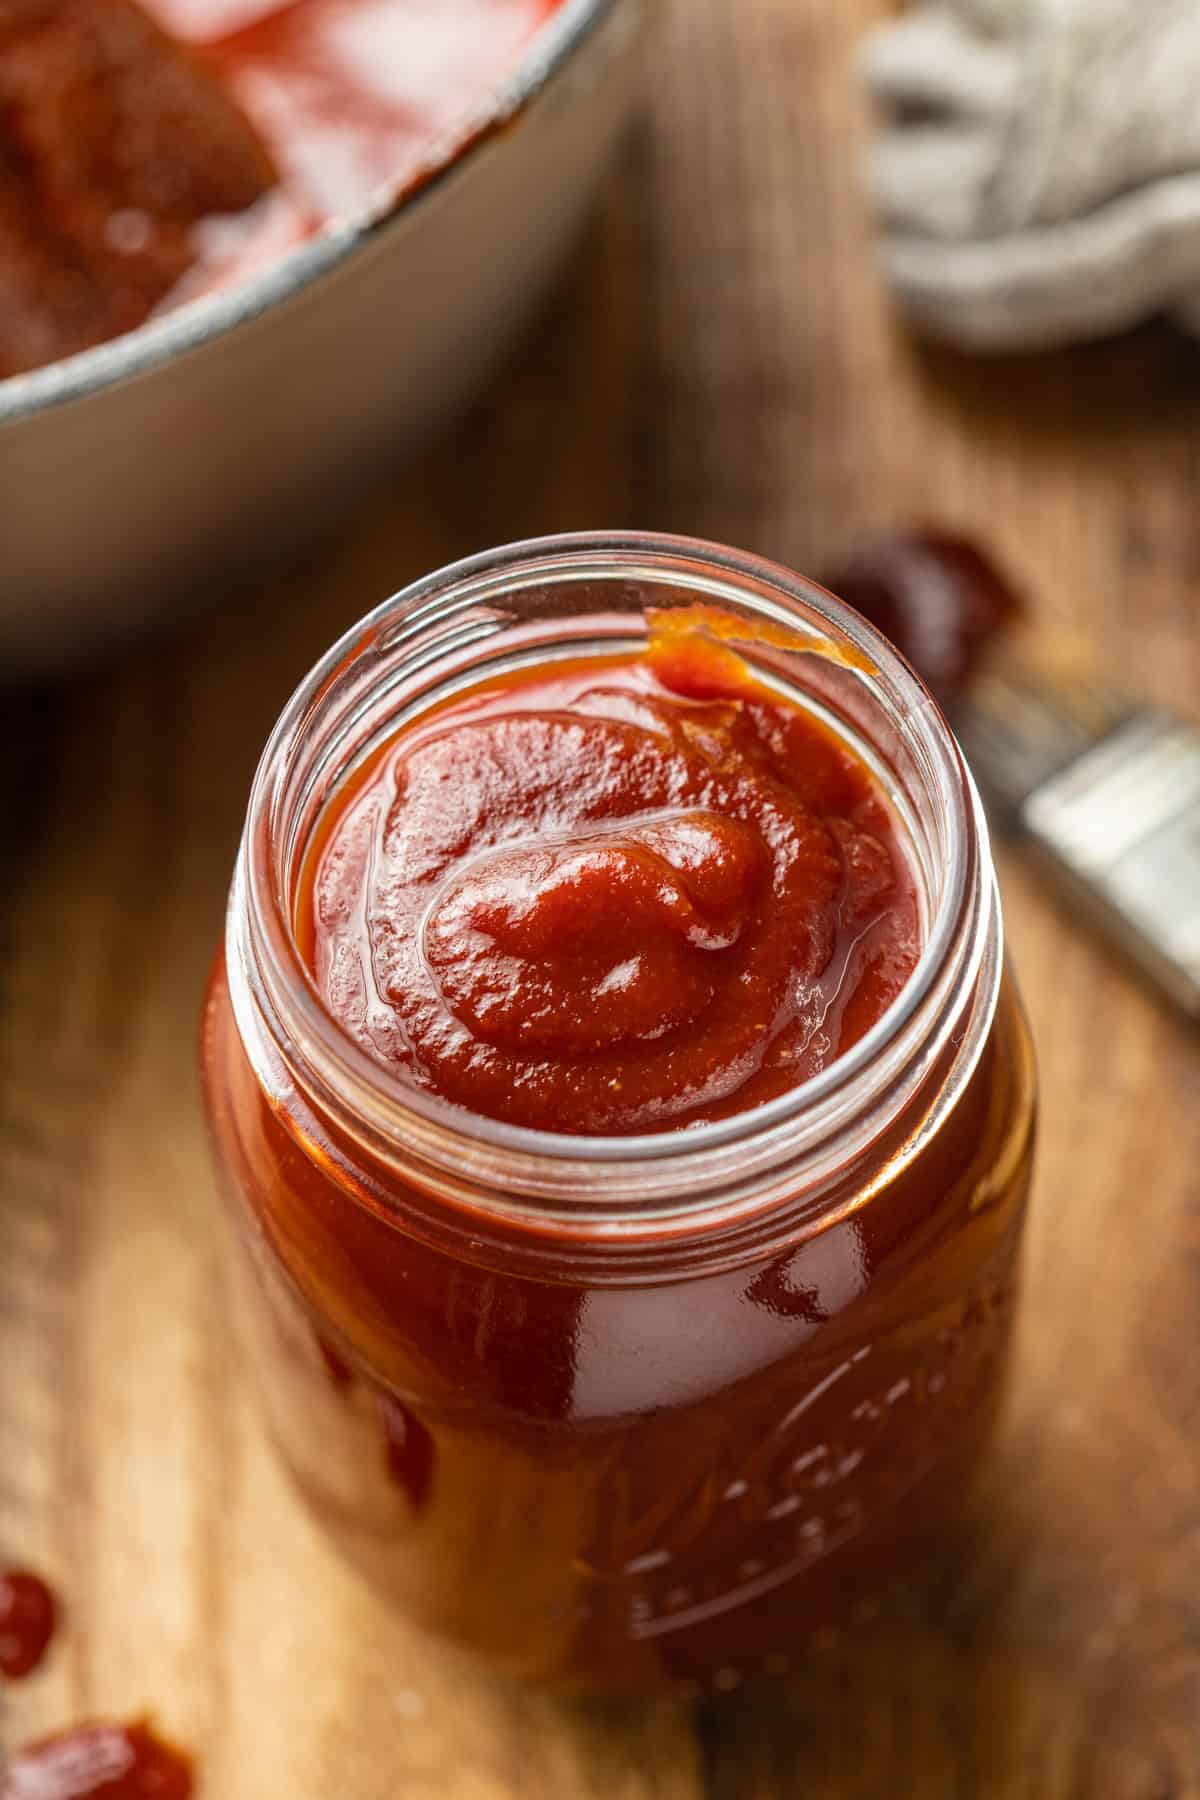 Jar of Vegan BBQ Sauce on a wooden surface with basting brush and pot in the background.